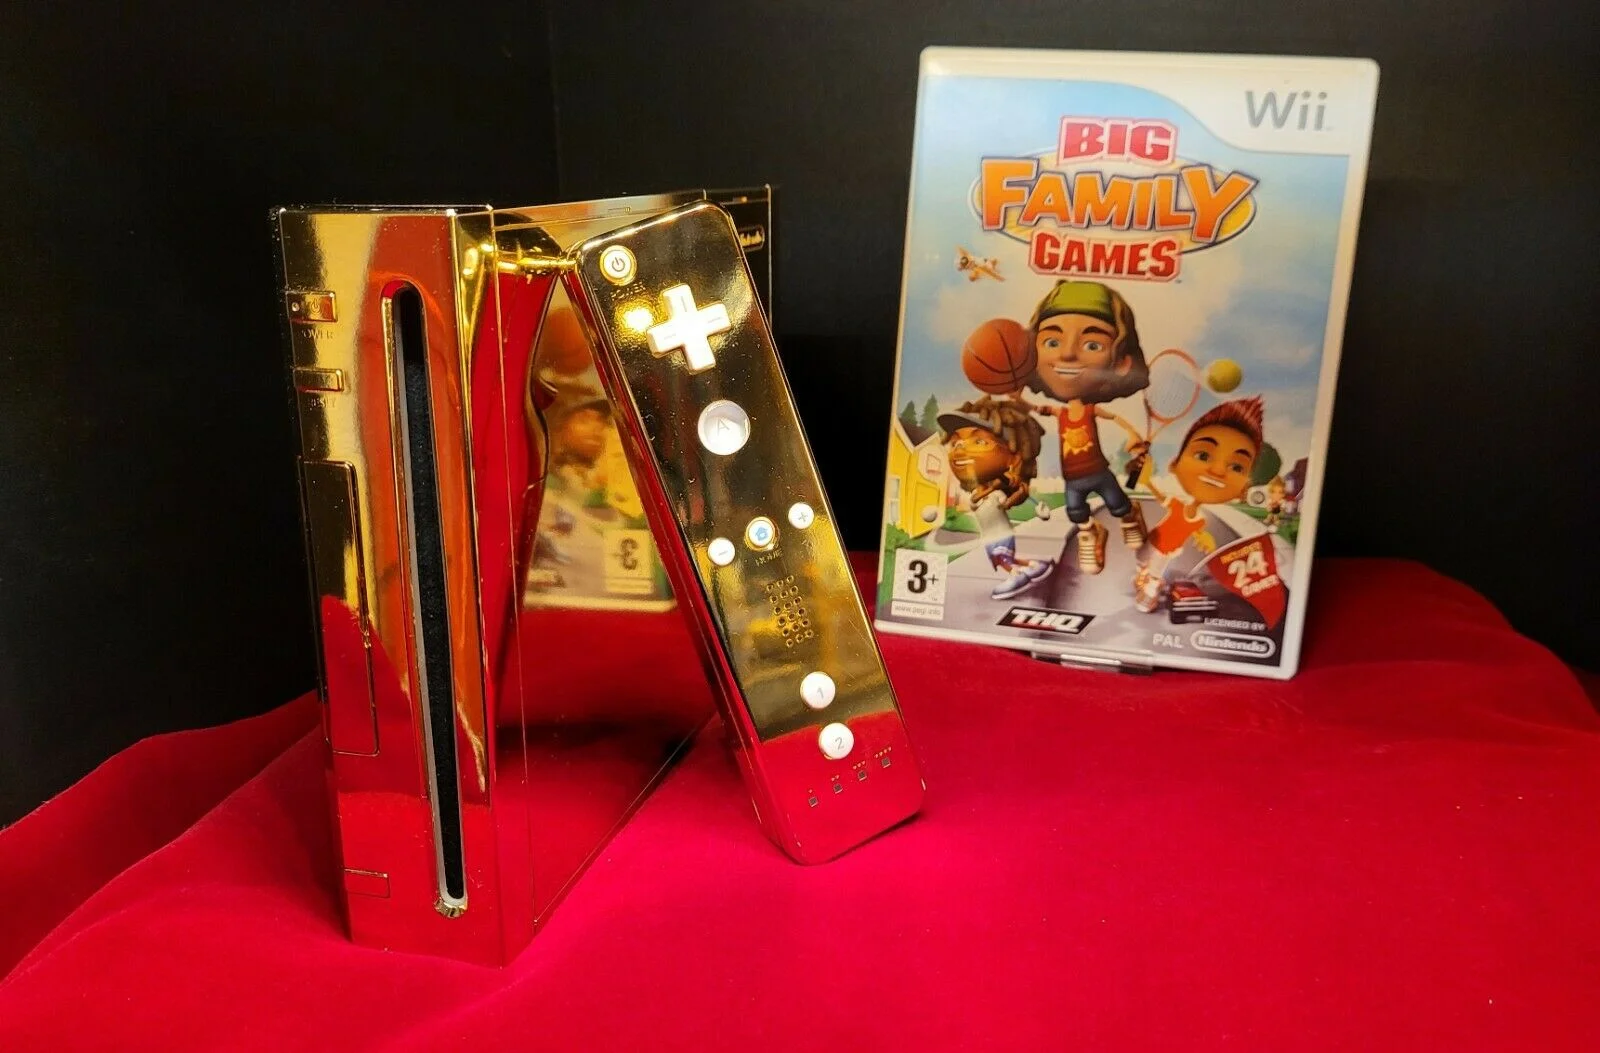 eBay listing of the golden Wii